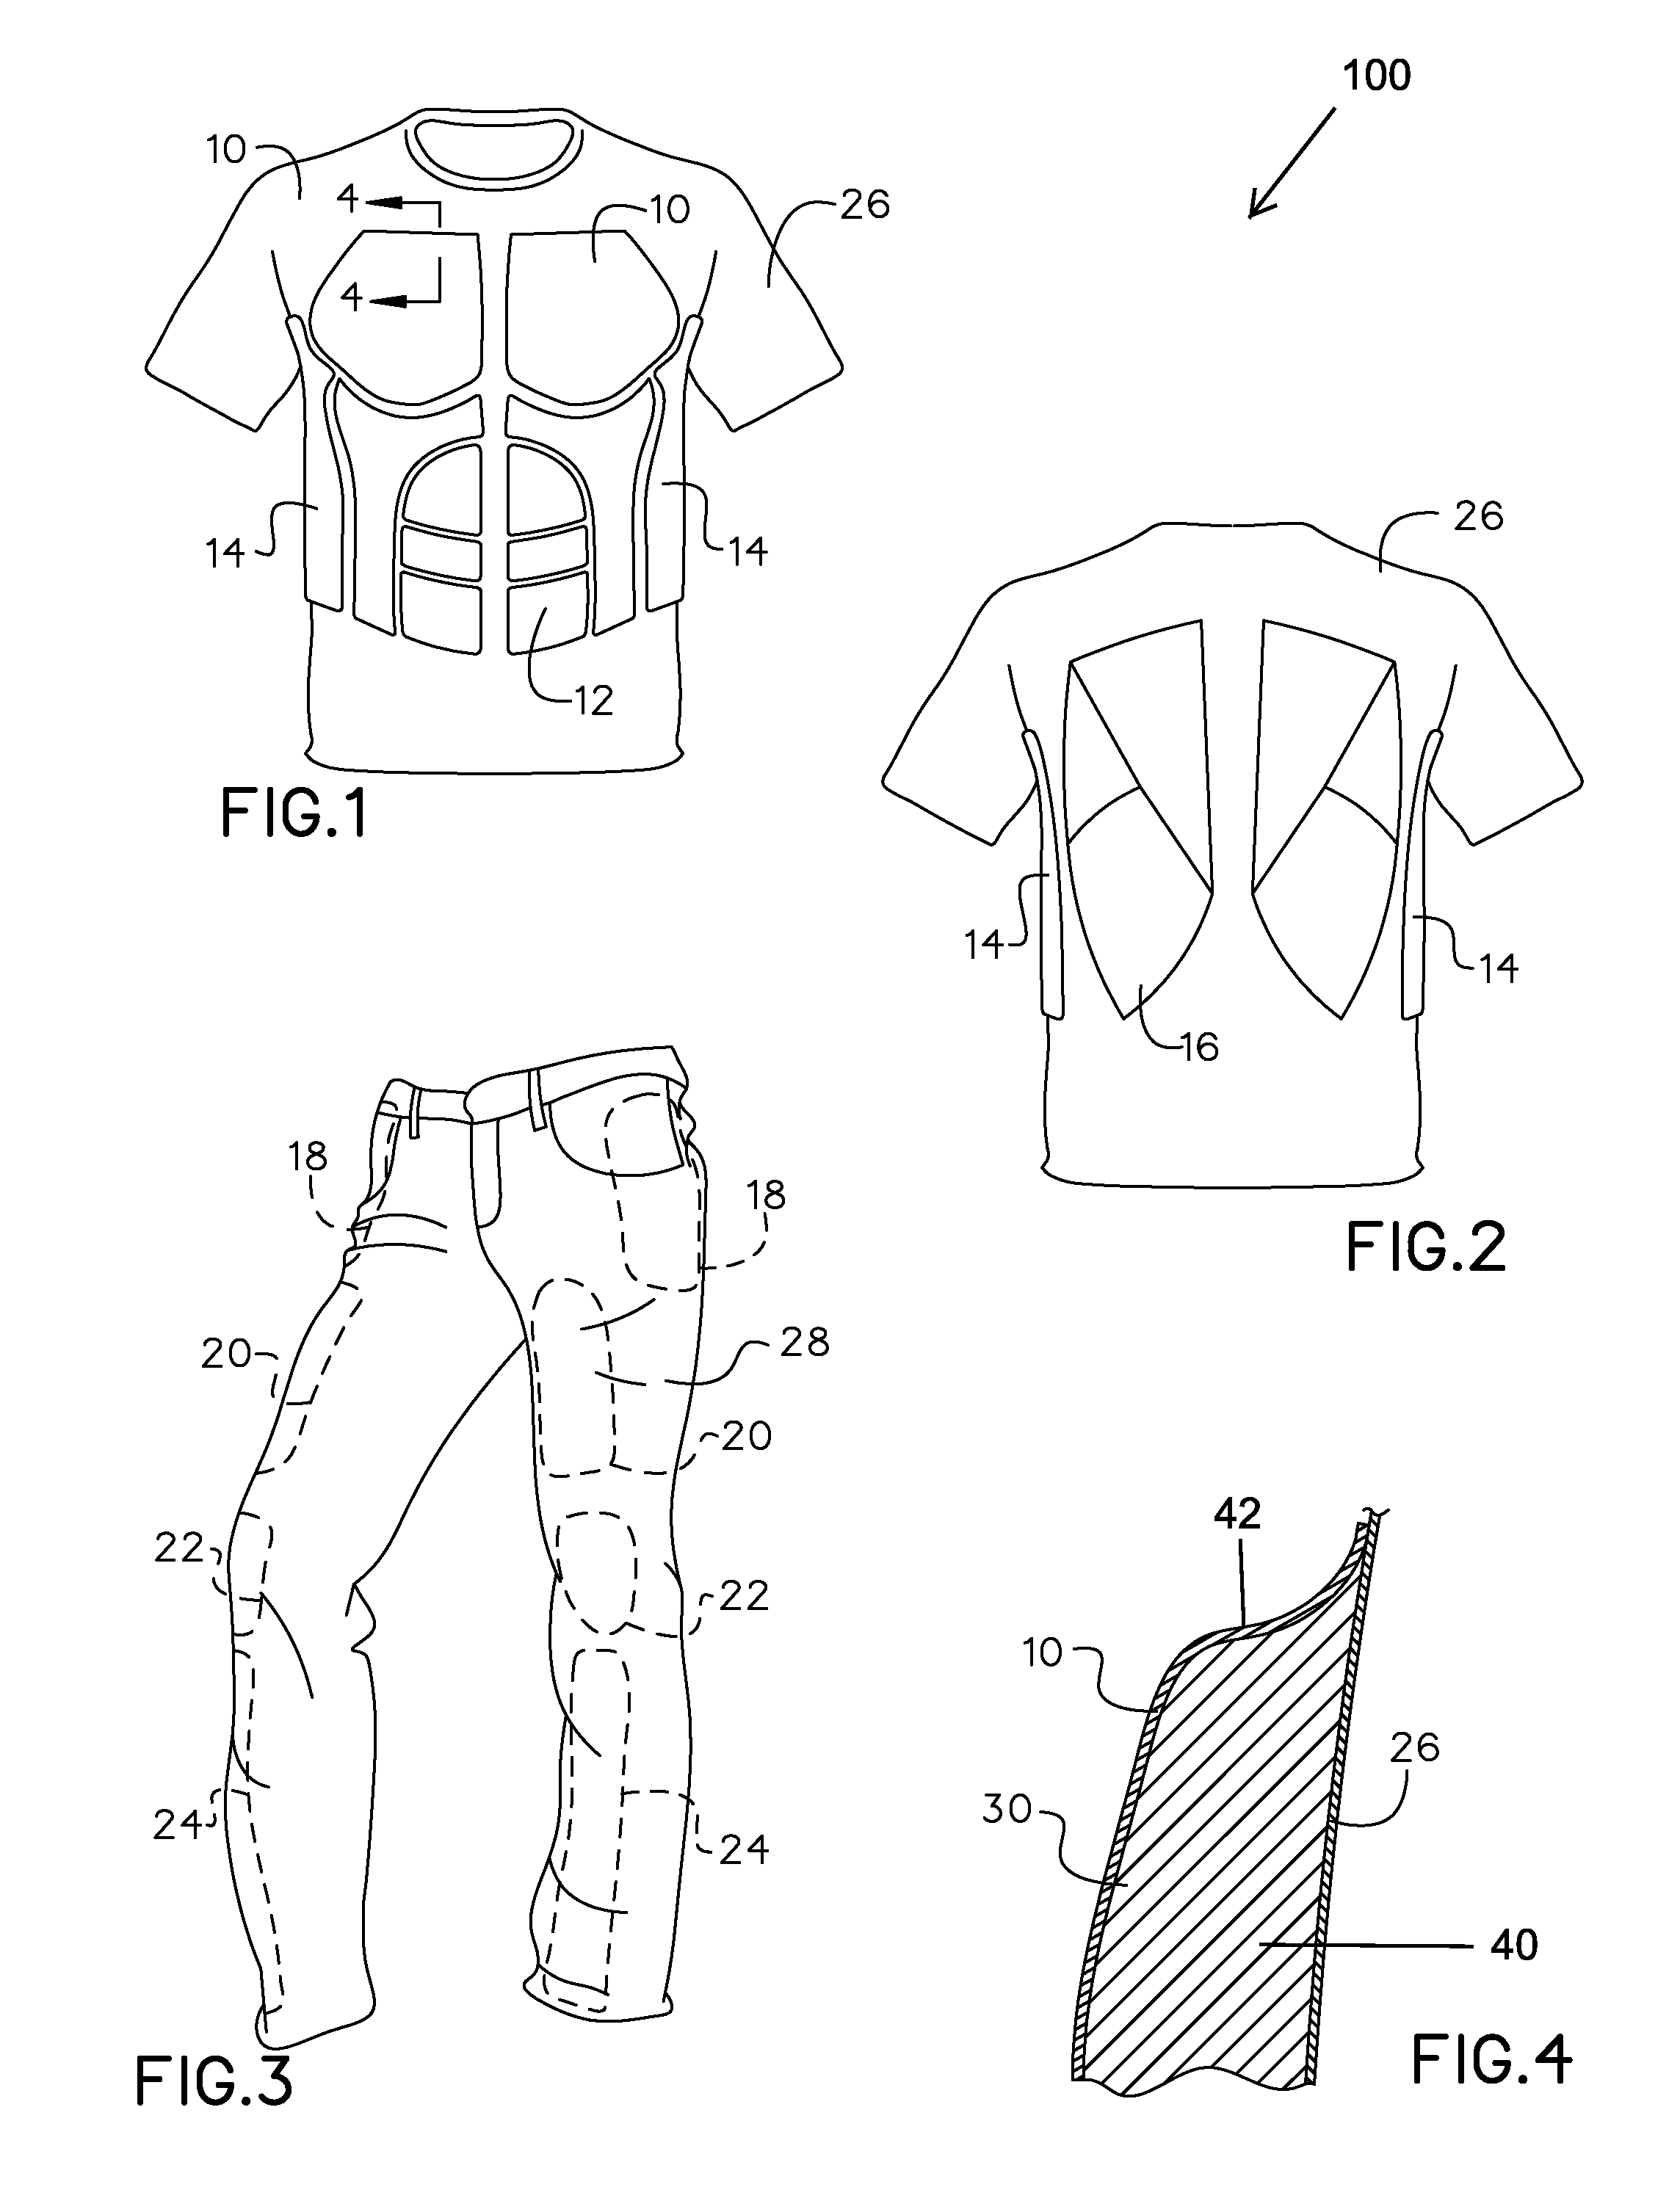 Protective padded garments